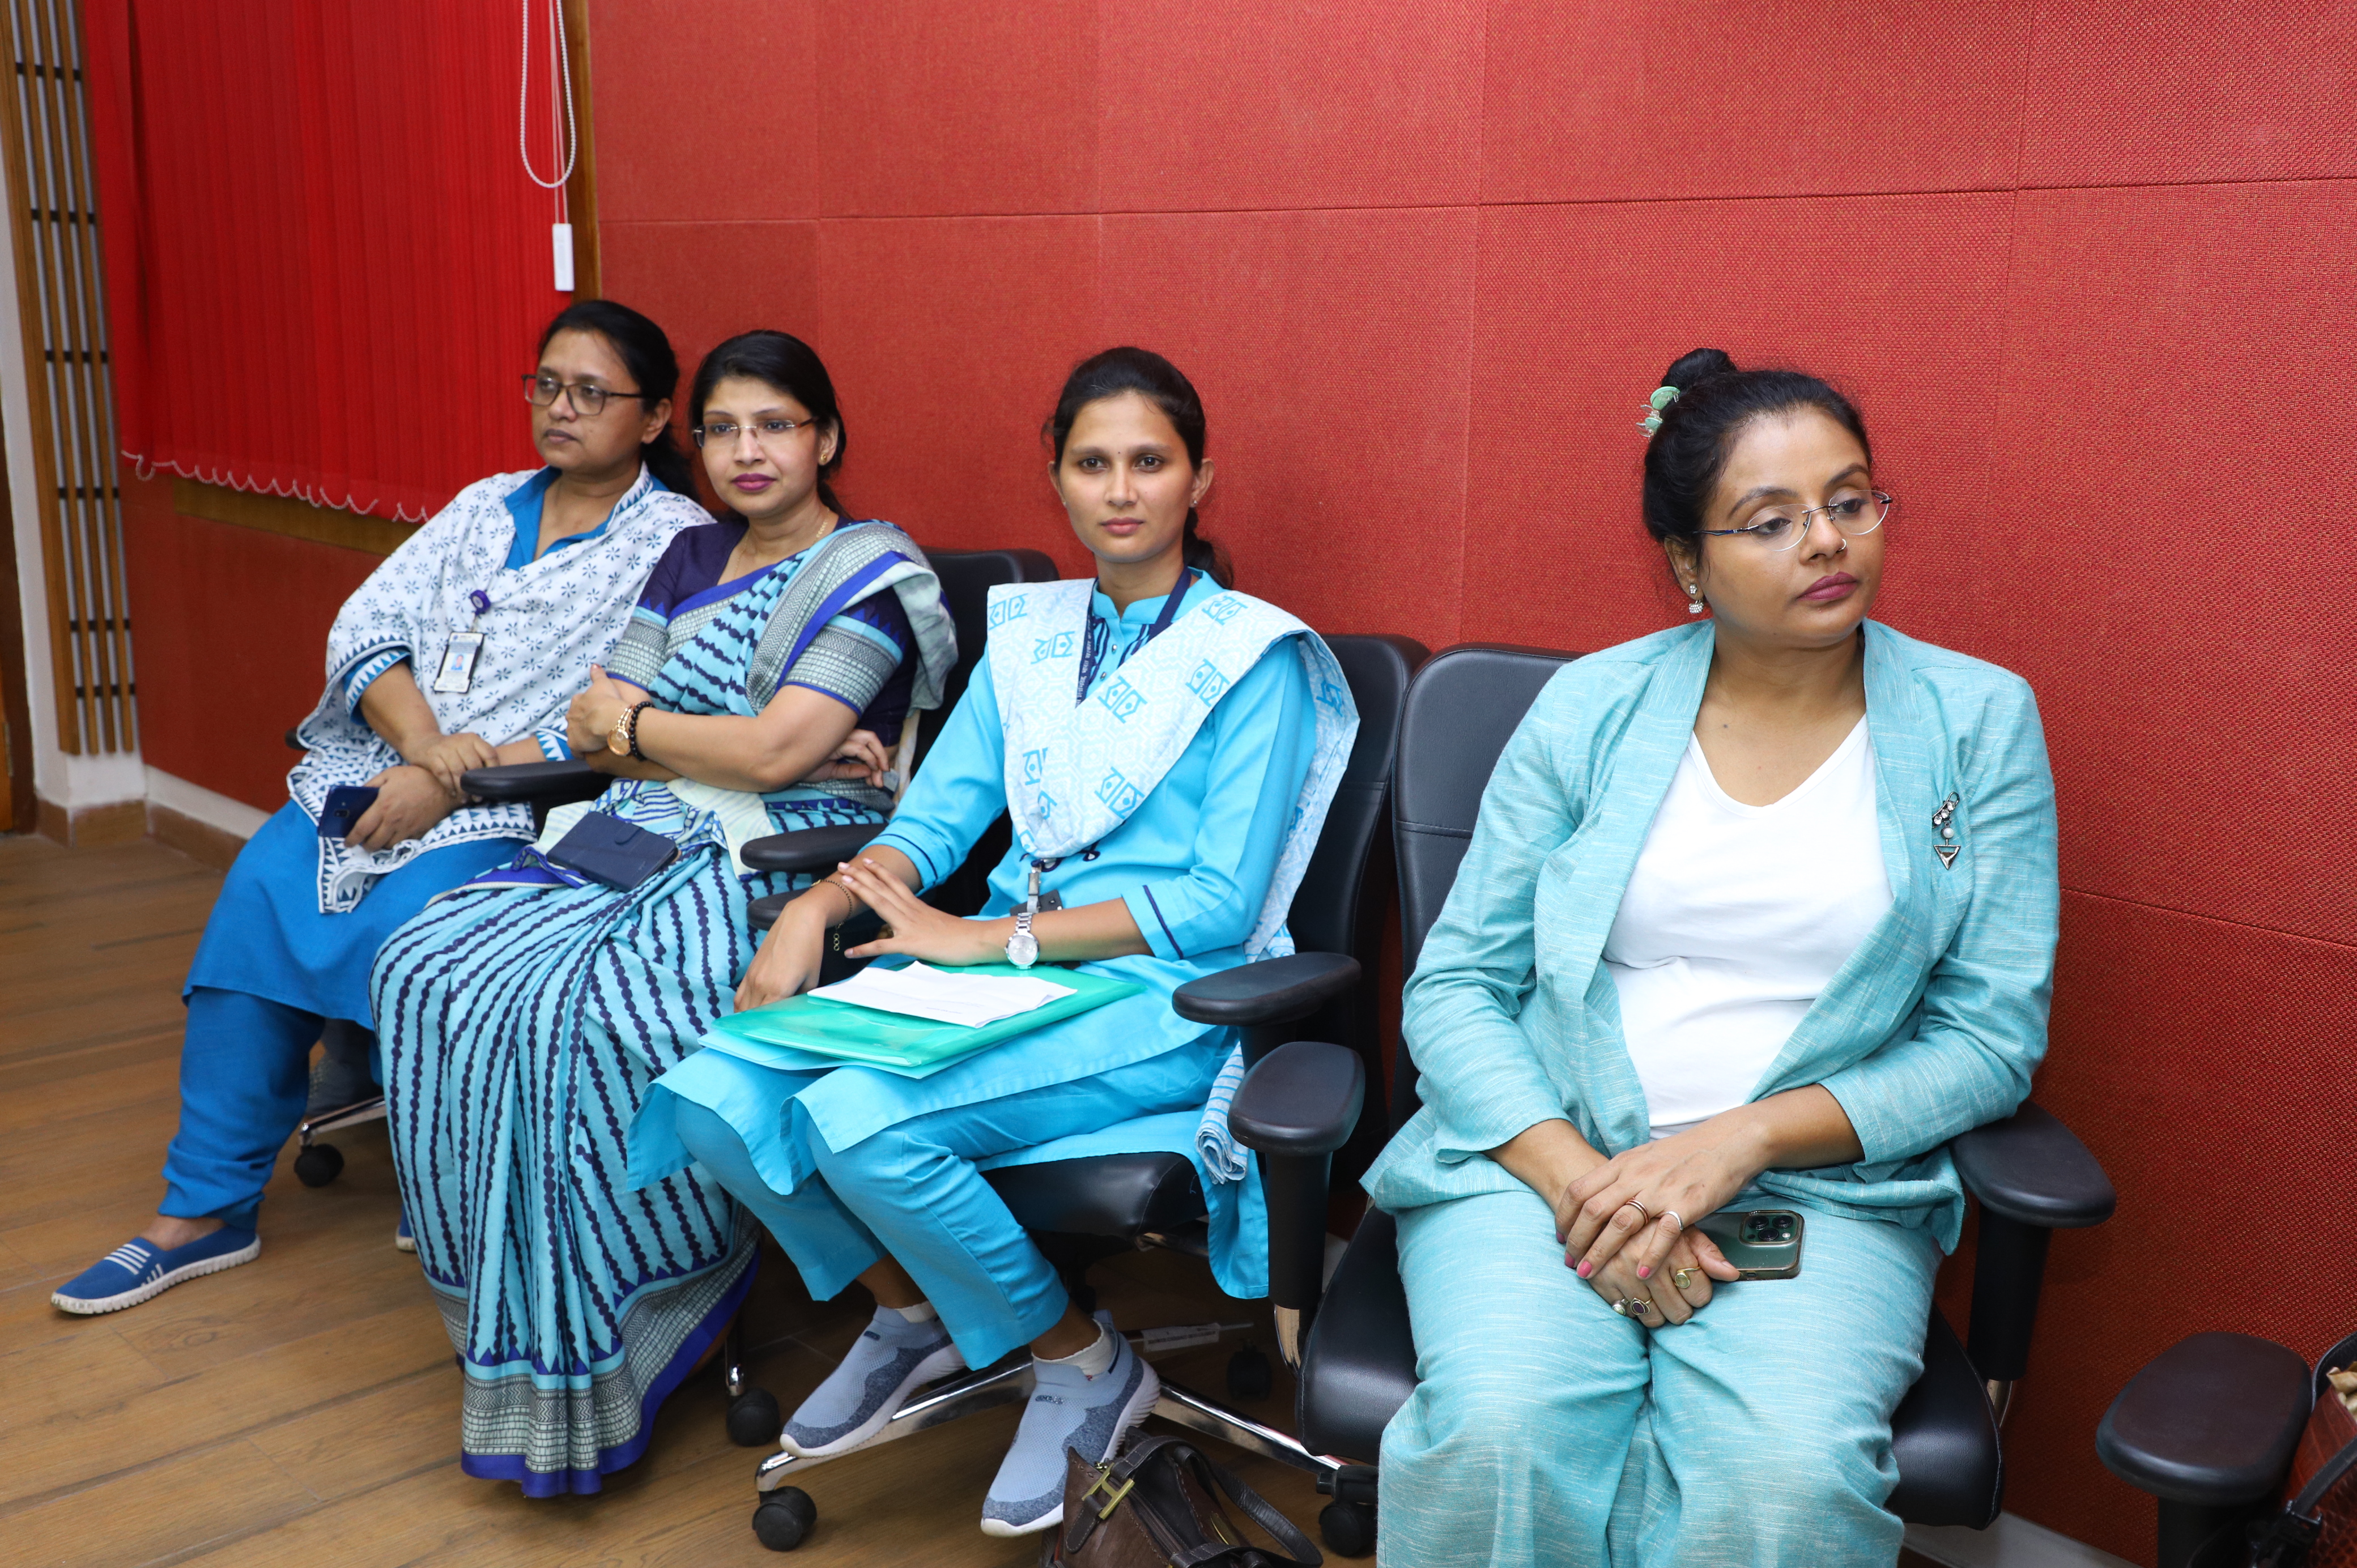 The Forum of Women In Public Sector under the aegis of SCOPE, held its Central Governing Body Meeting, Regional Executive Body (ER) Meeting, & Training Session for WIPS Delegates at GRSE, Kolkata on 13 Oct 23